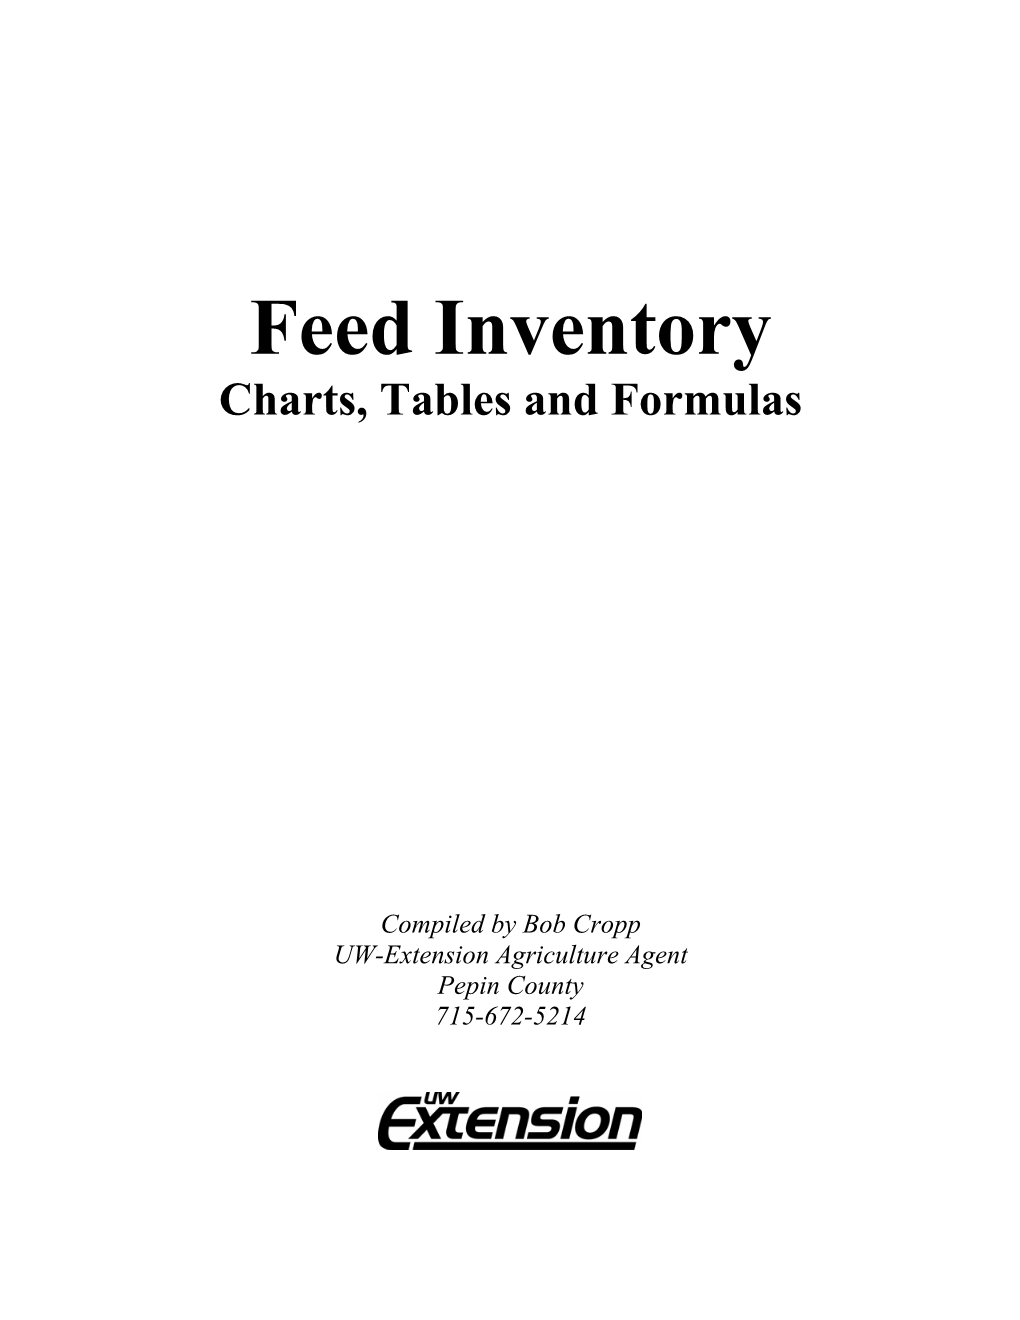 Feed Inventory Charts, Tables and Formulas